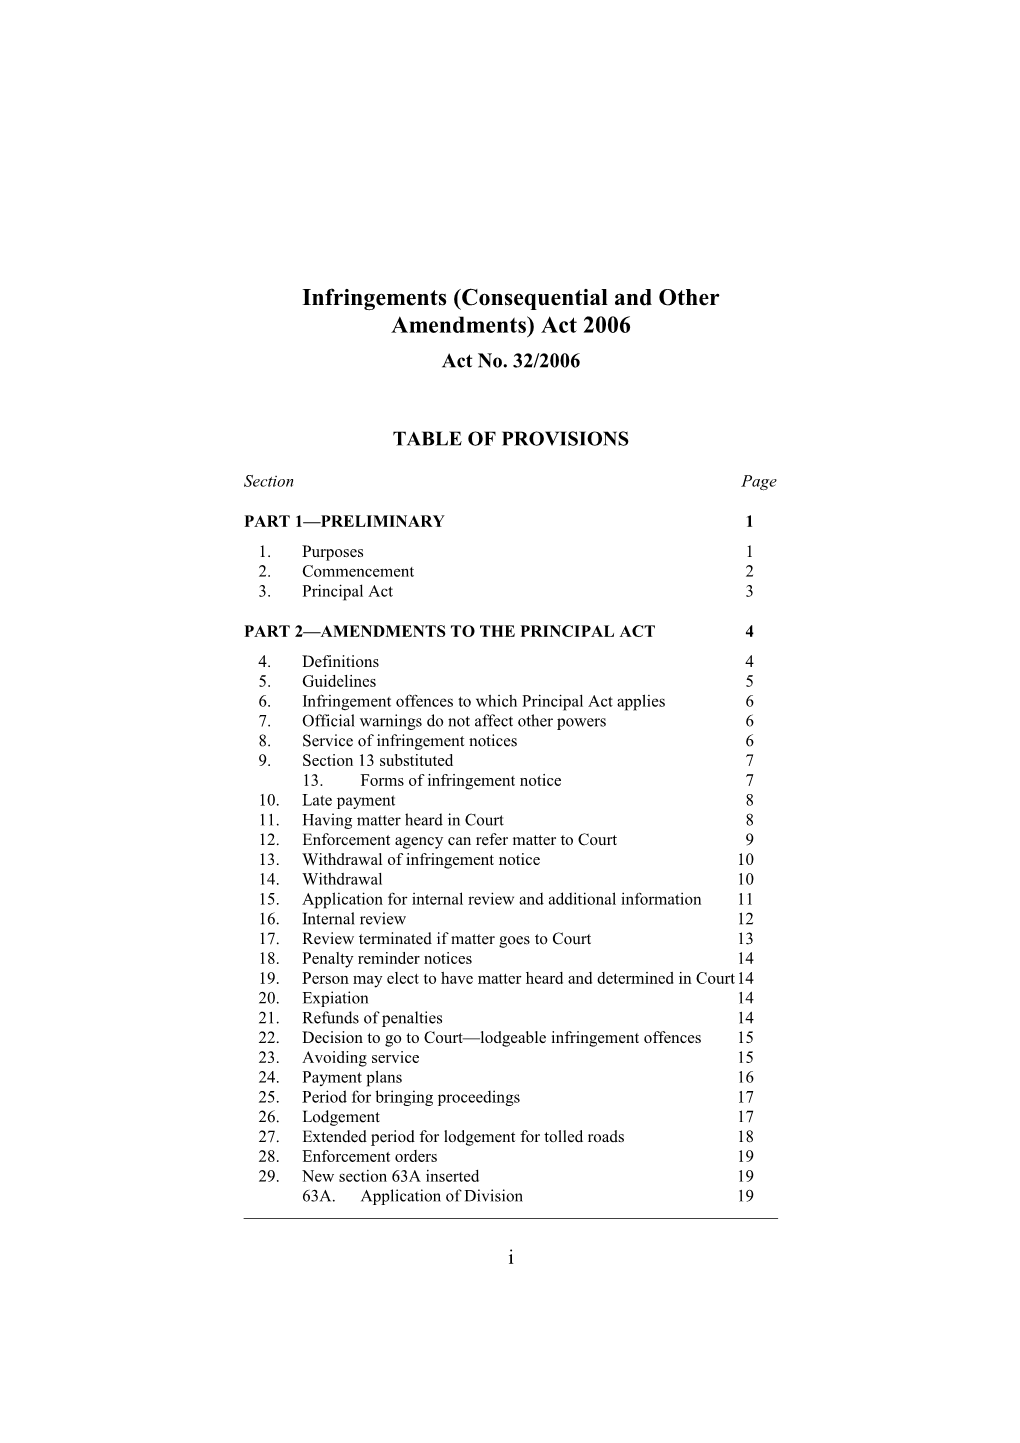 Infringements (Consequential and Other Amendments) Act 2006